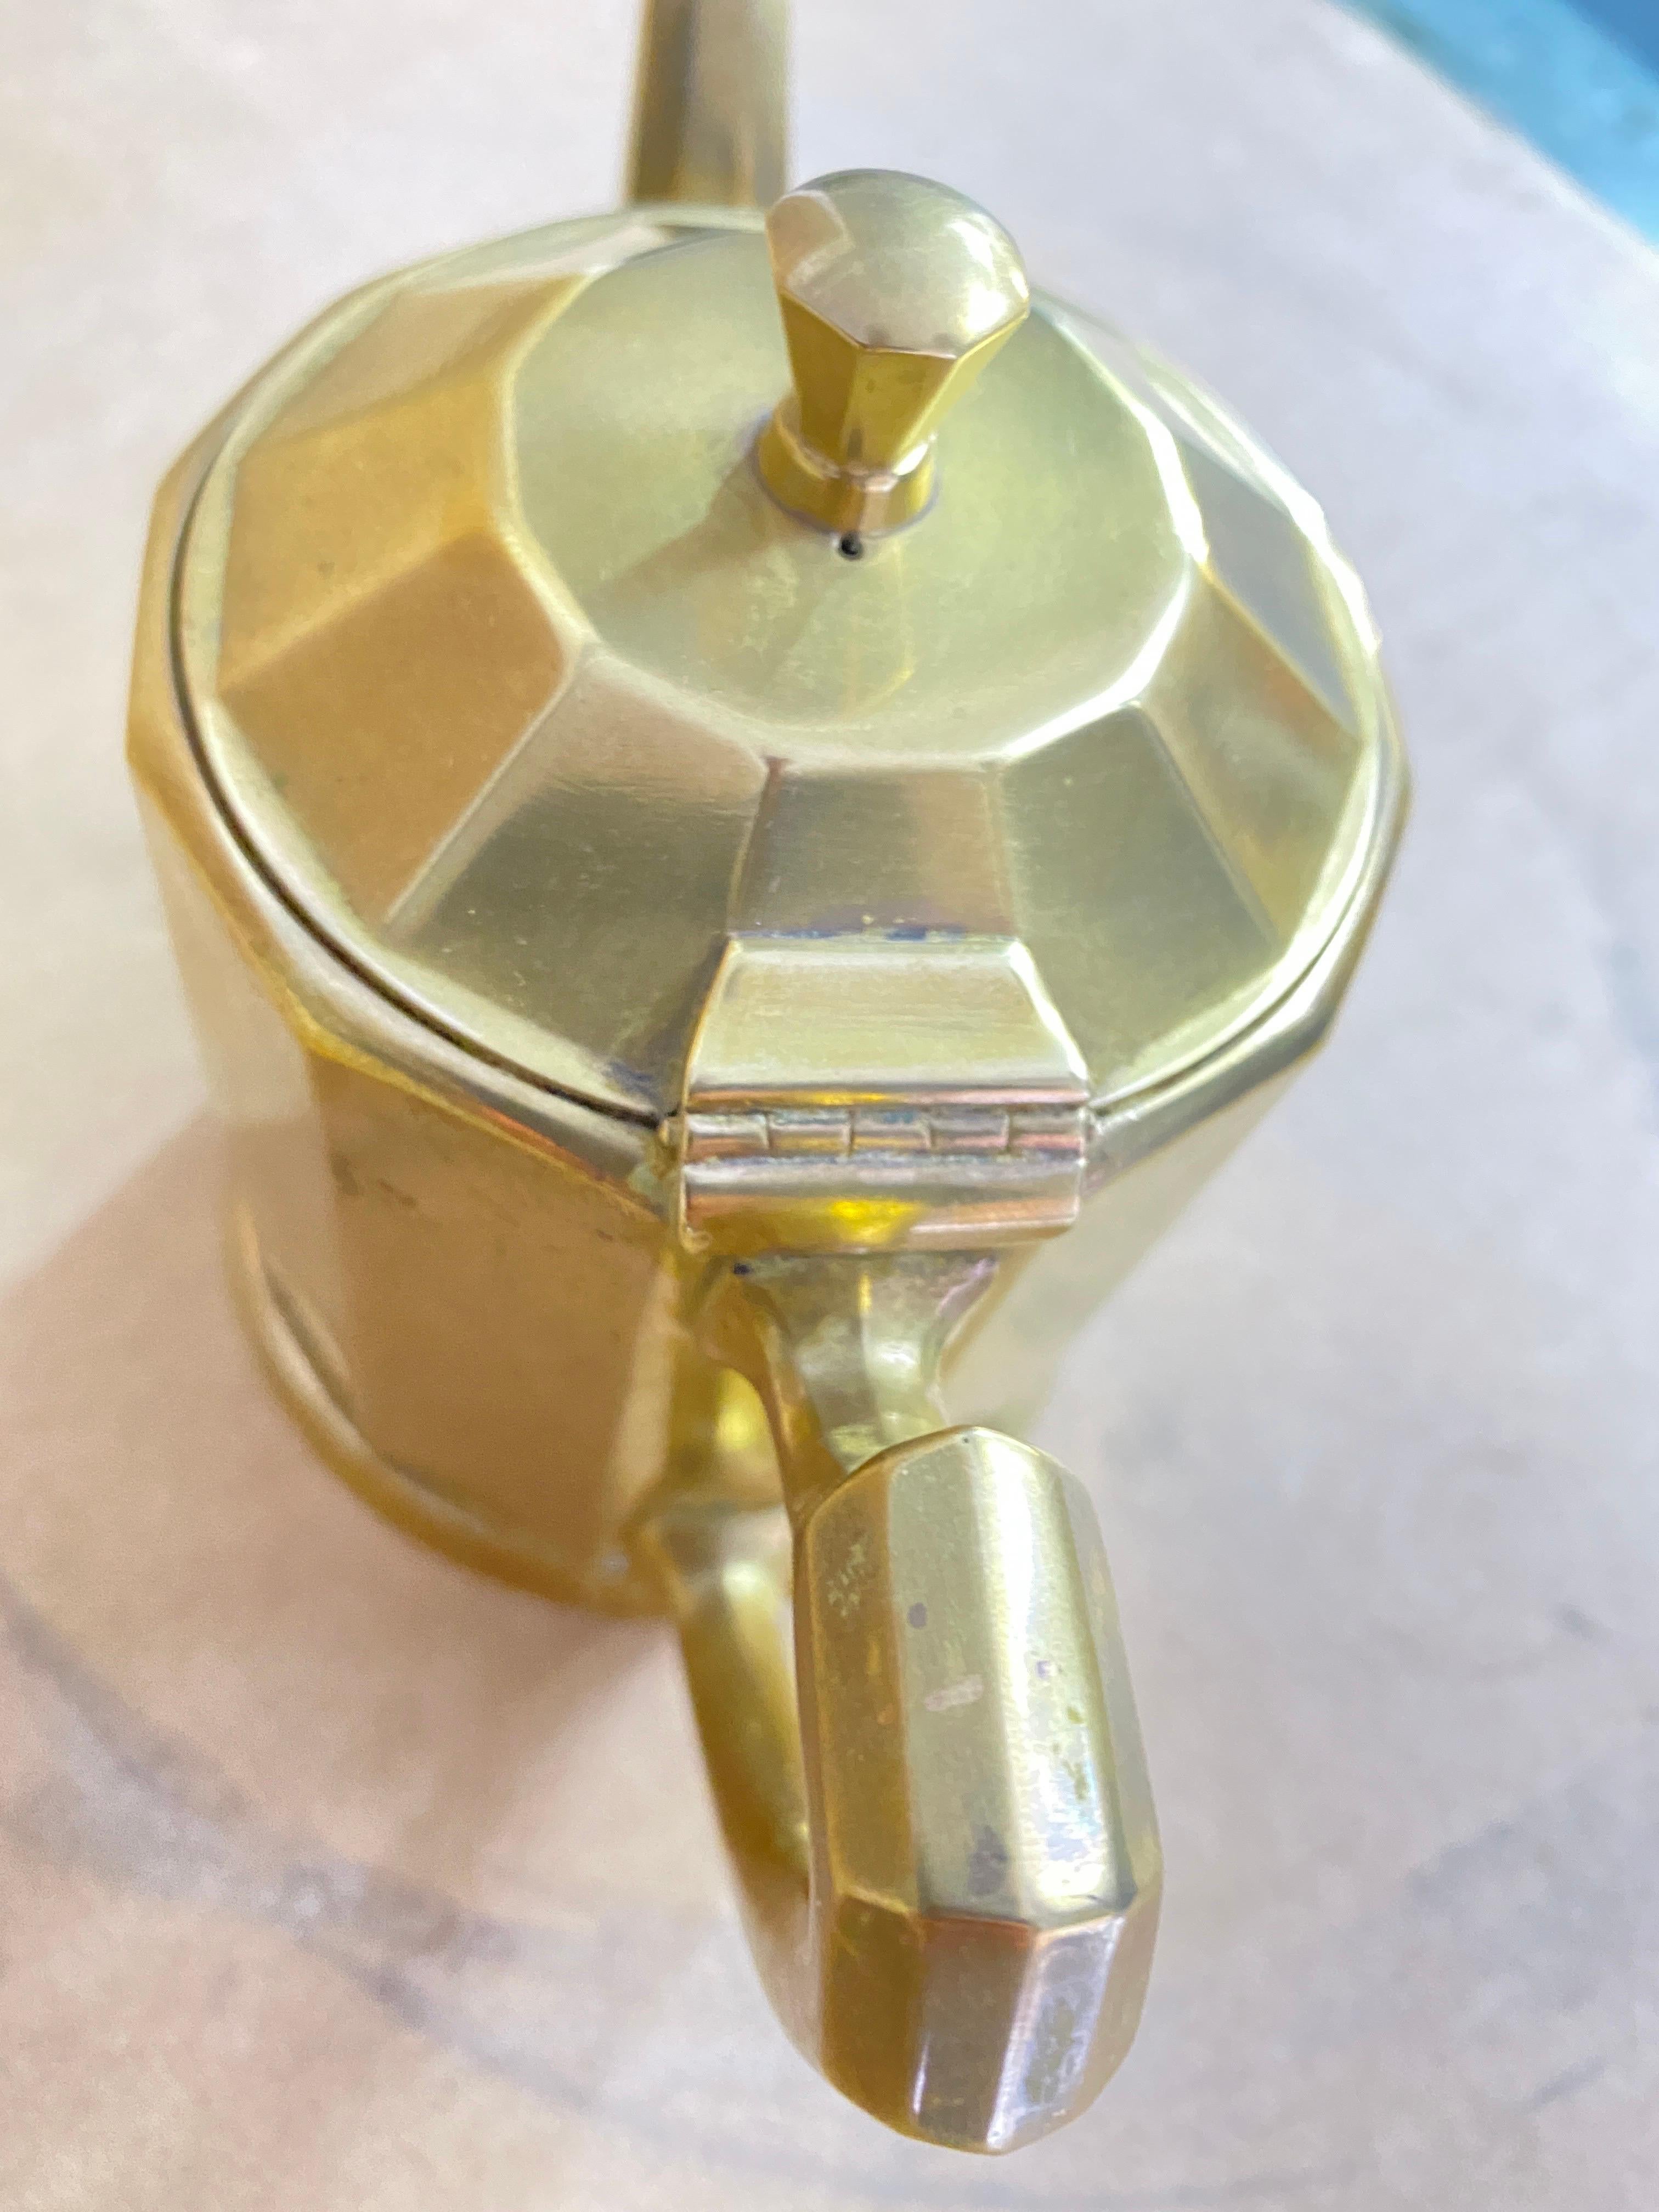 This coffee service is a service from the Art deco period. Made in France in the 1940s in a metal called Oreum because it is close to the appearance of gold, and was used in France by the famous coppersmith Jean Dunand, I show you a detail photo